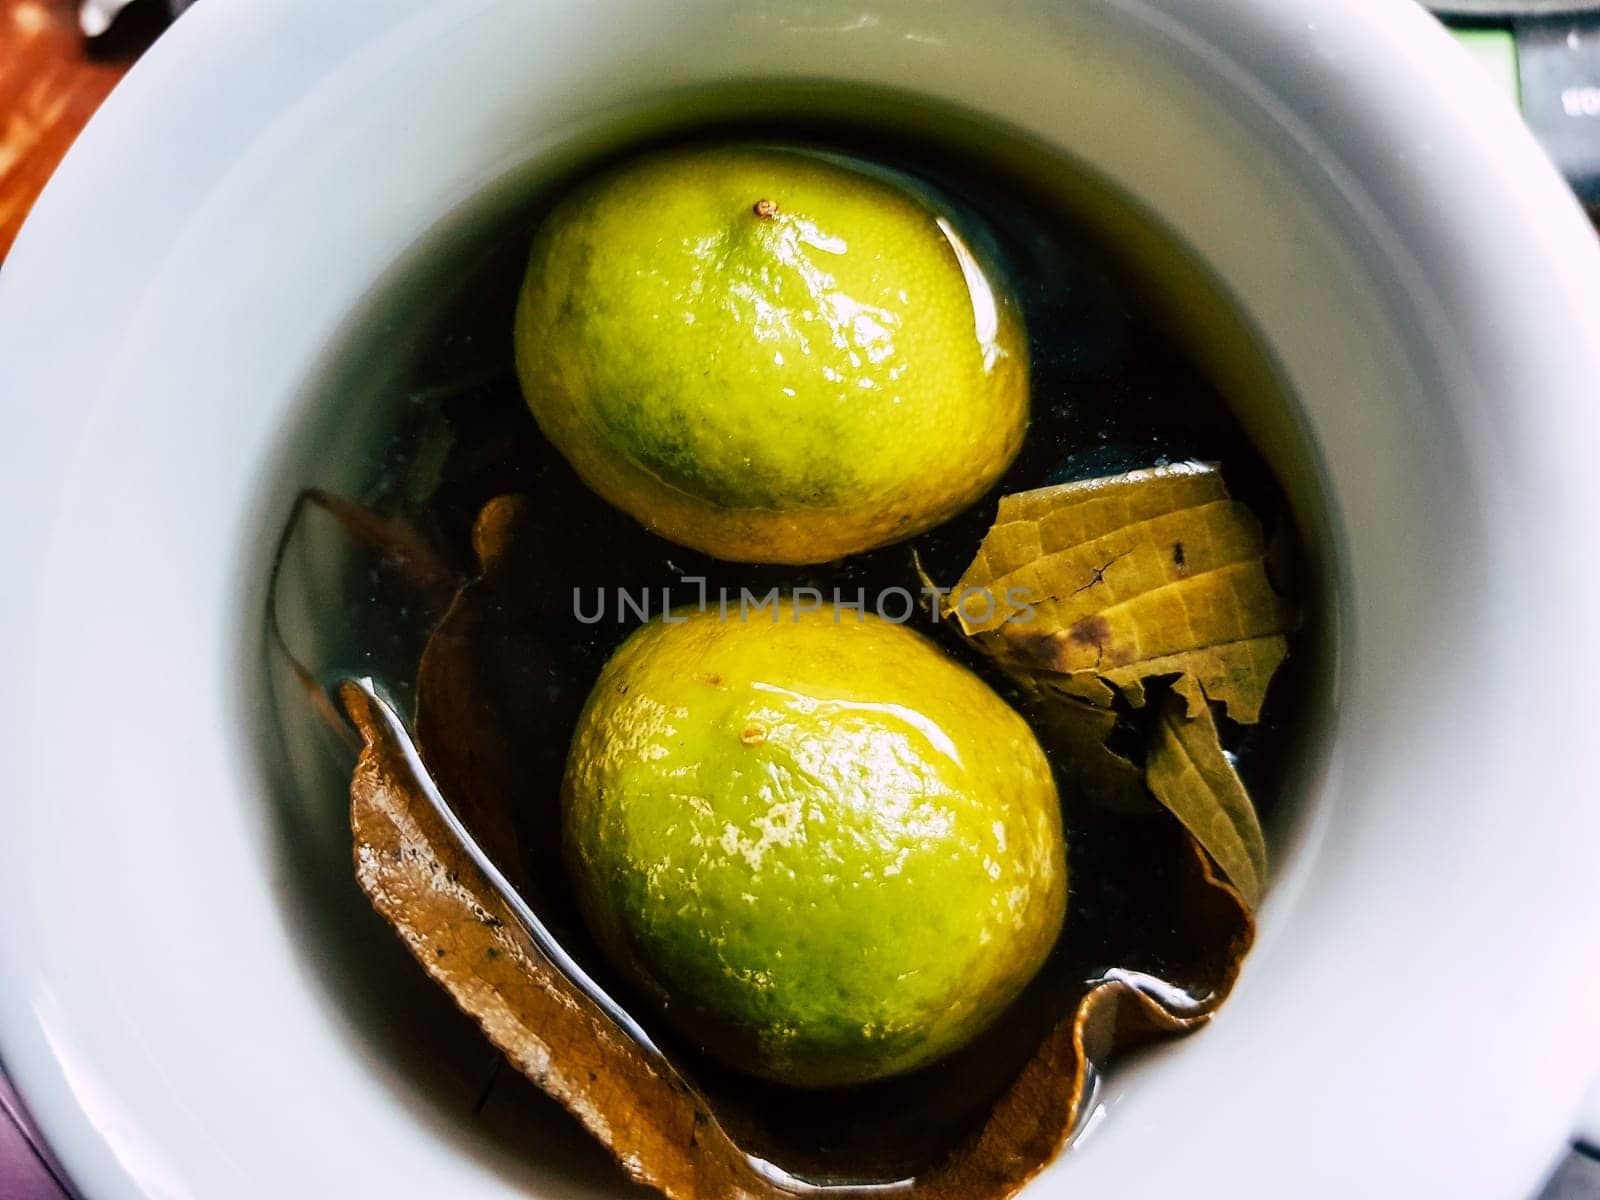 Homemade hot drink with honey, lemon and matico to remedy the cold. by Peruphotoart